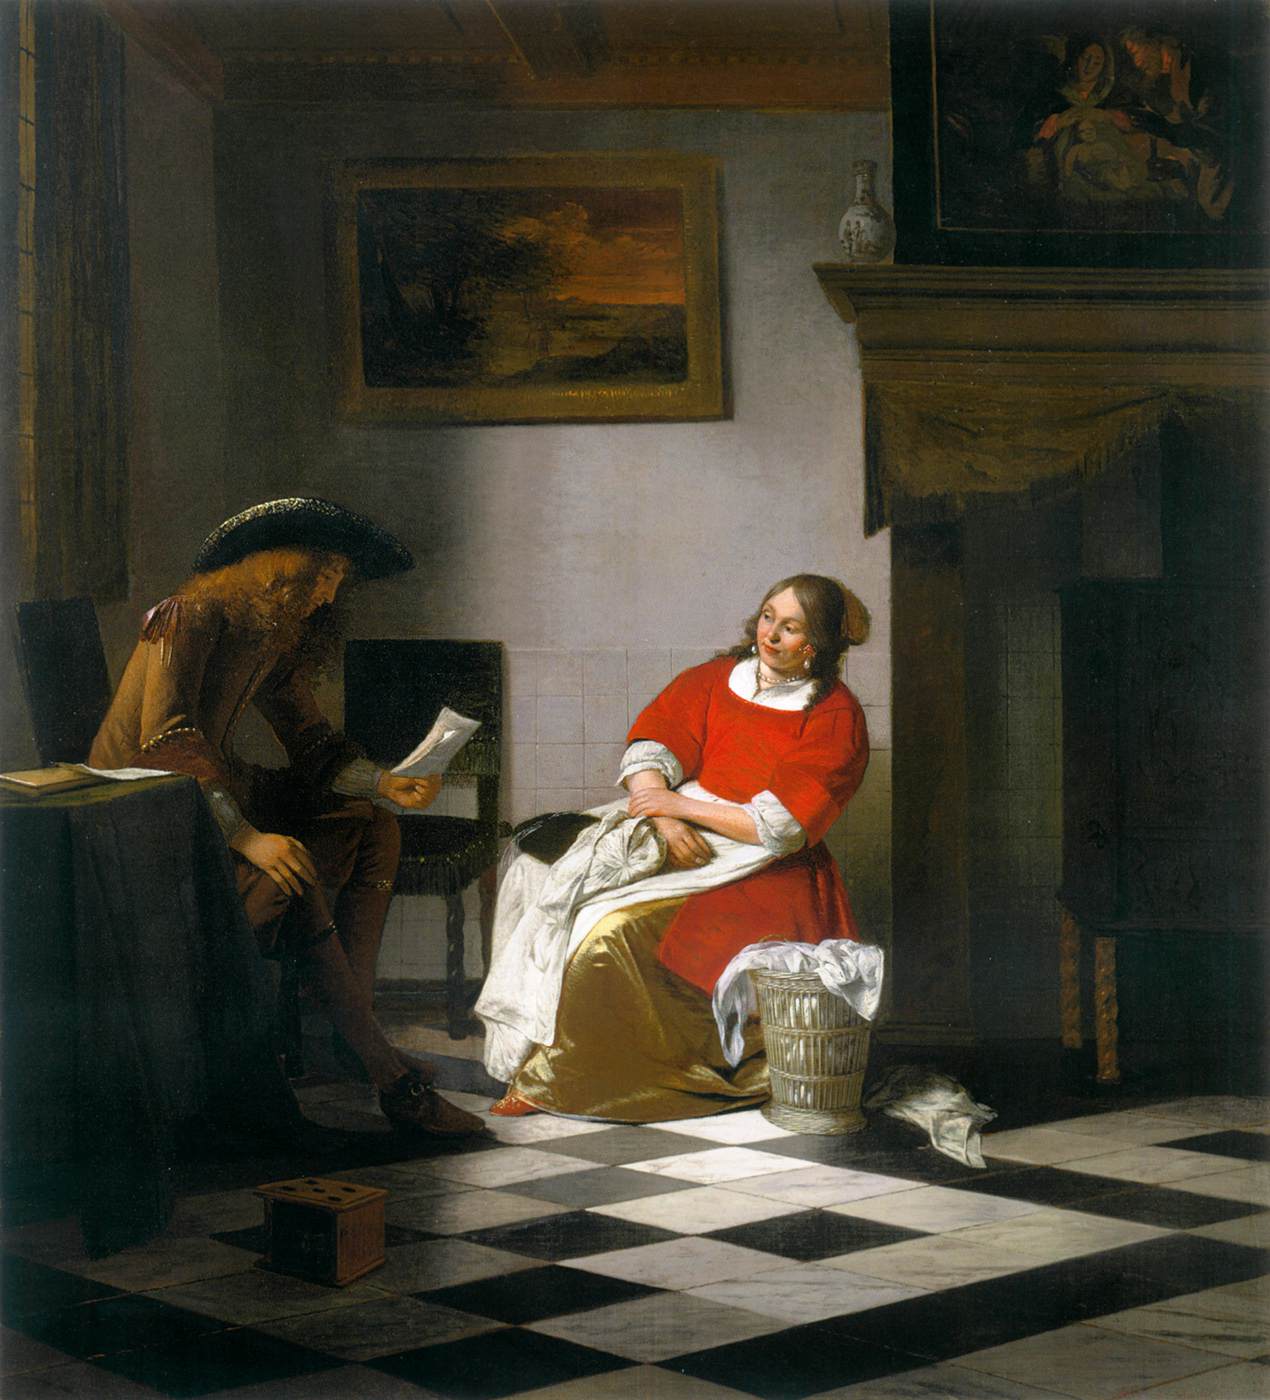 Man Reading a Letter to a Woman